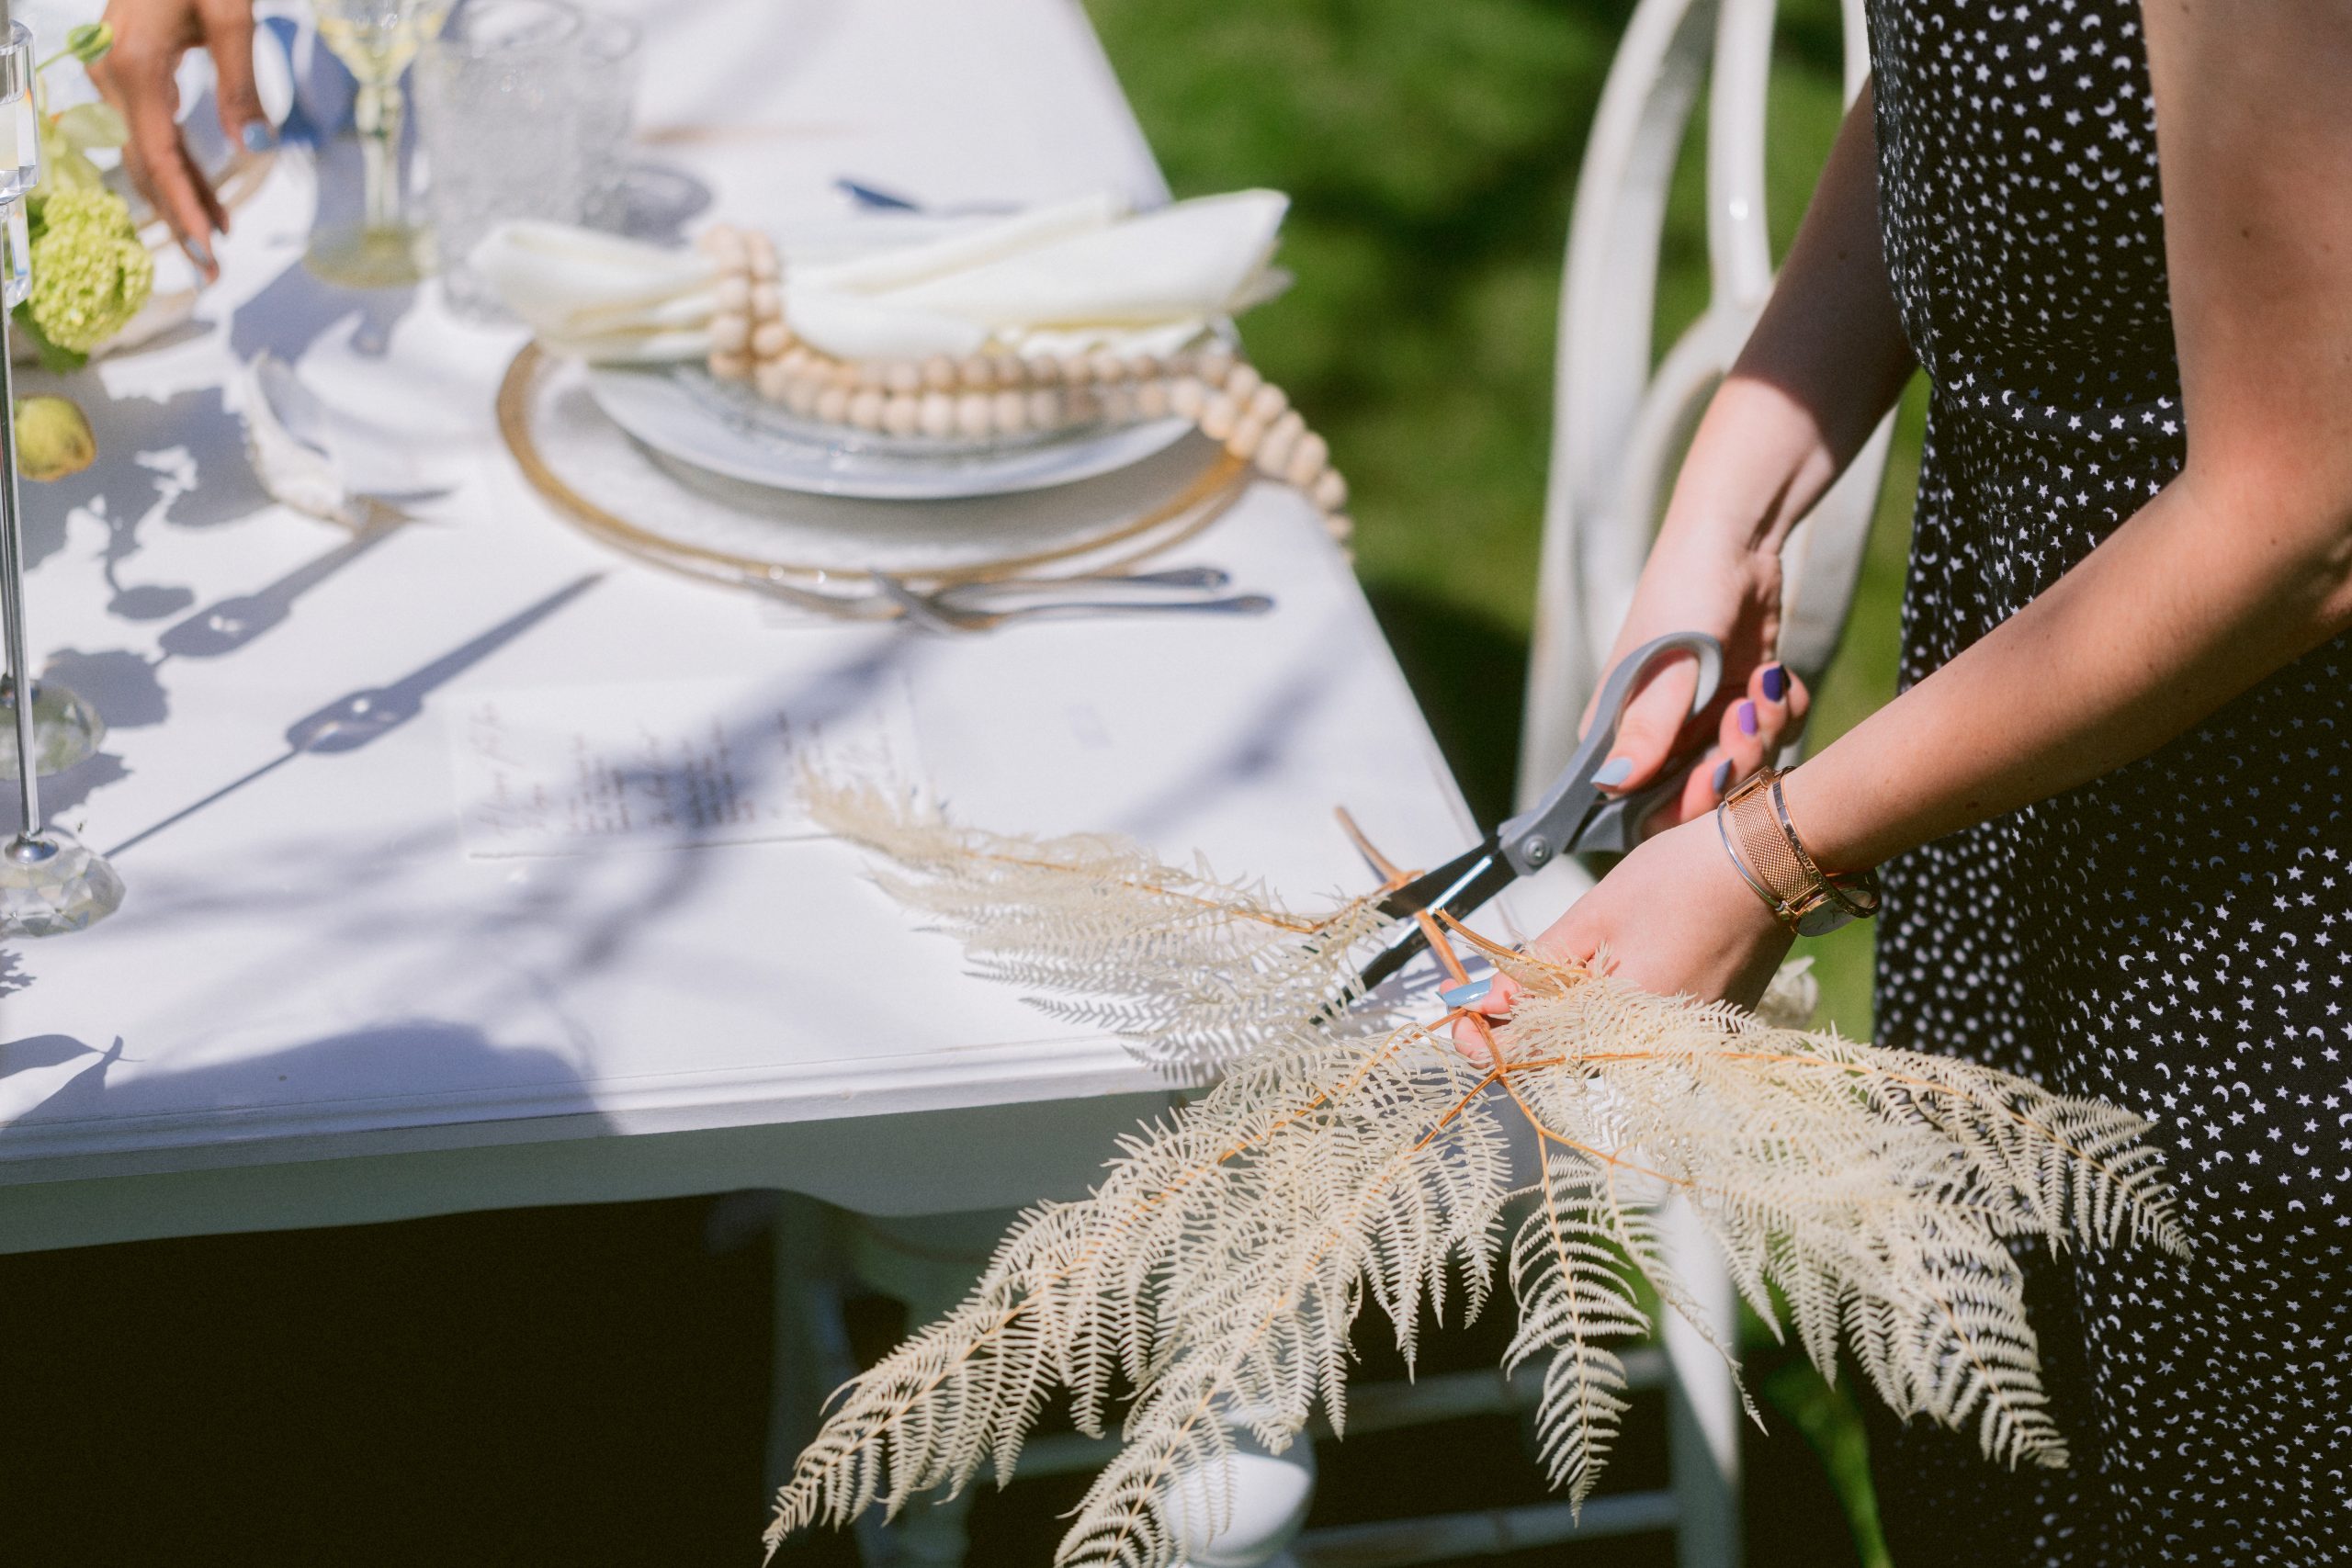 A person cutting a decorative palm for a table setting